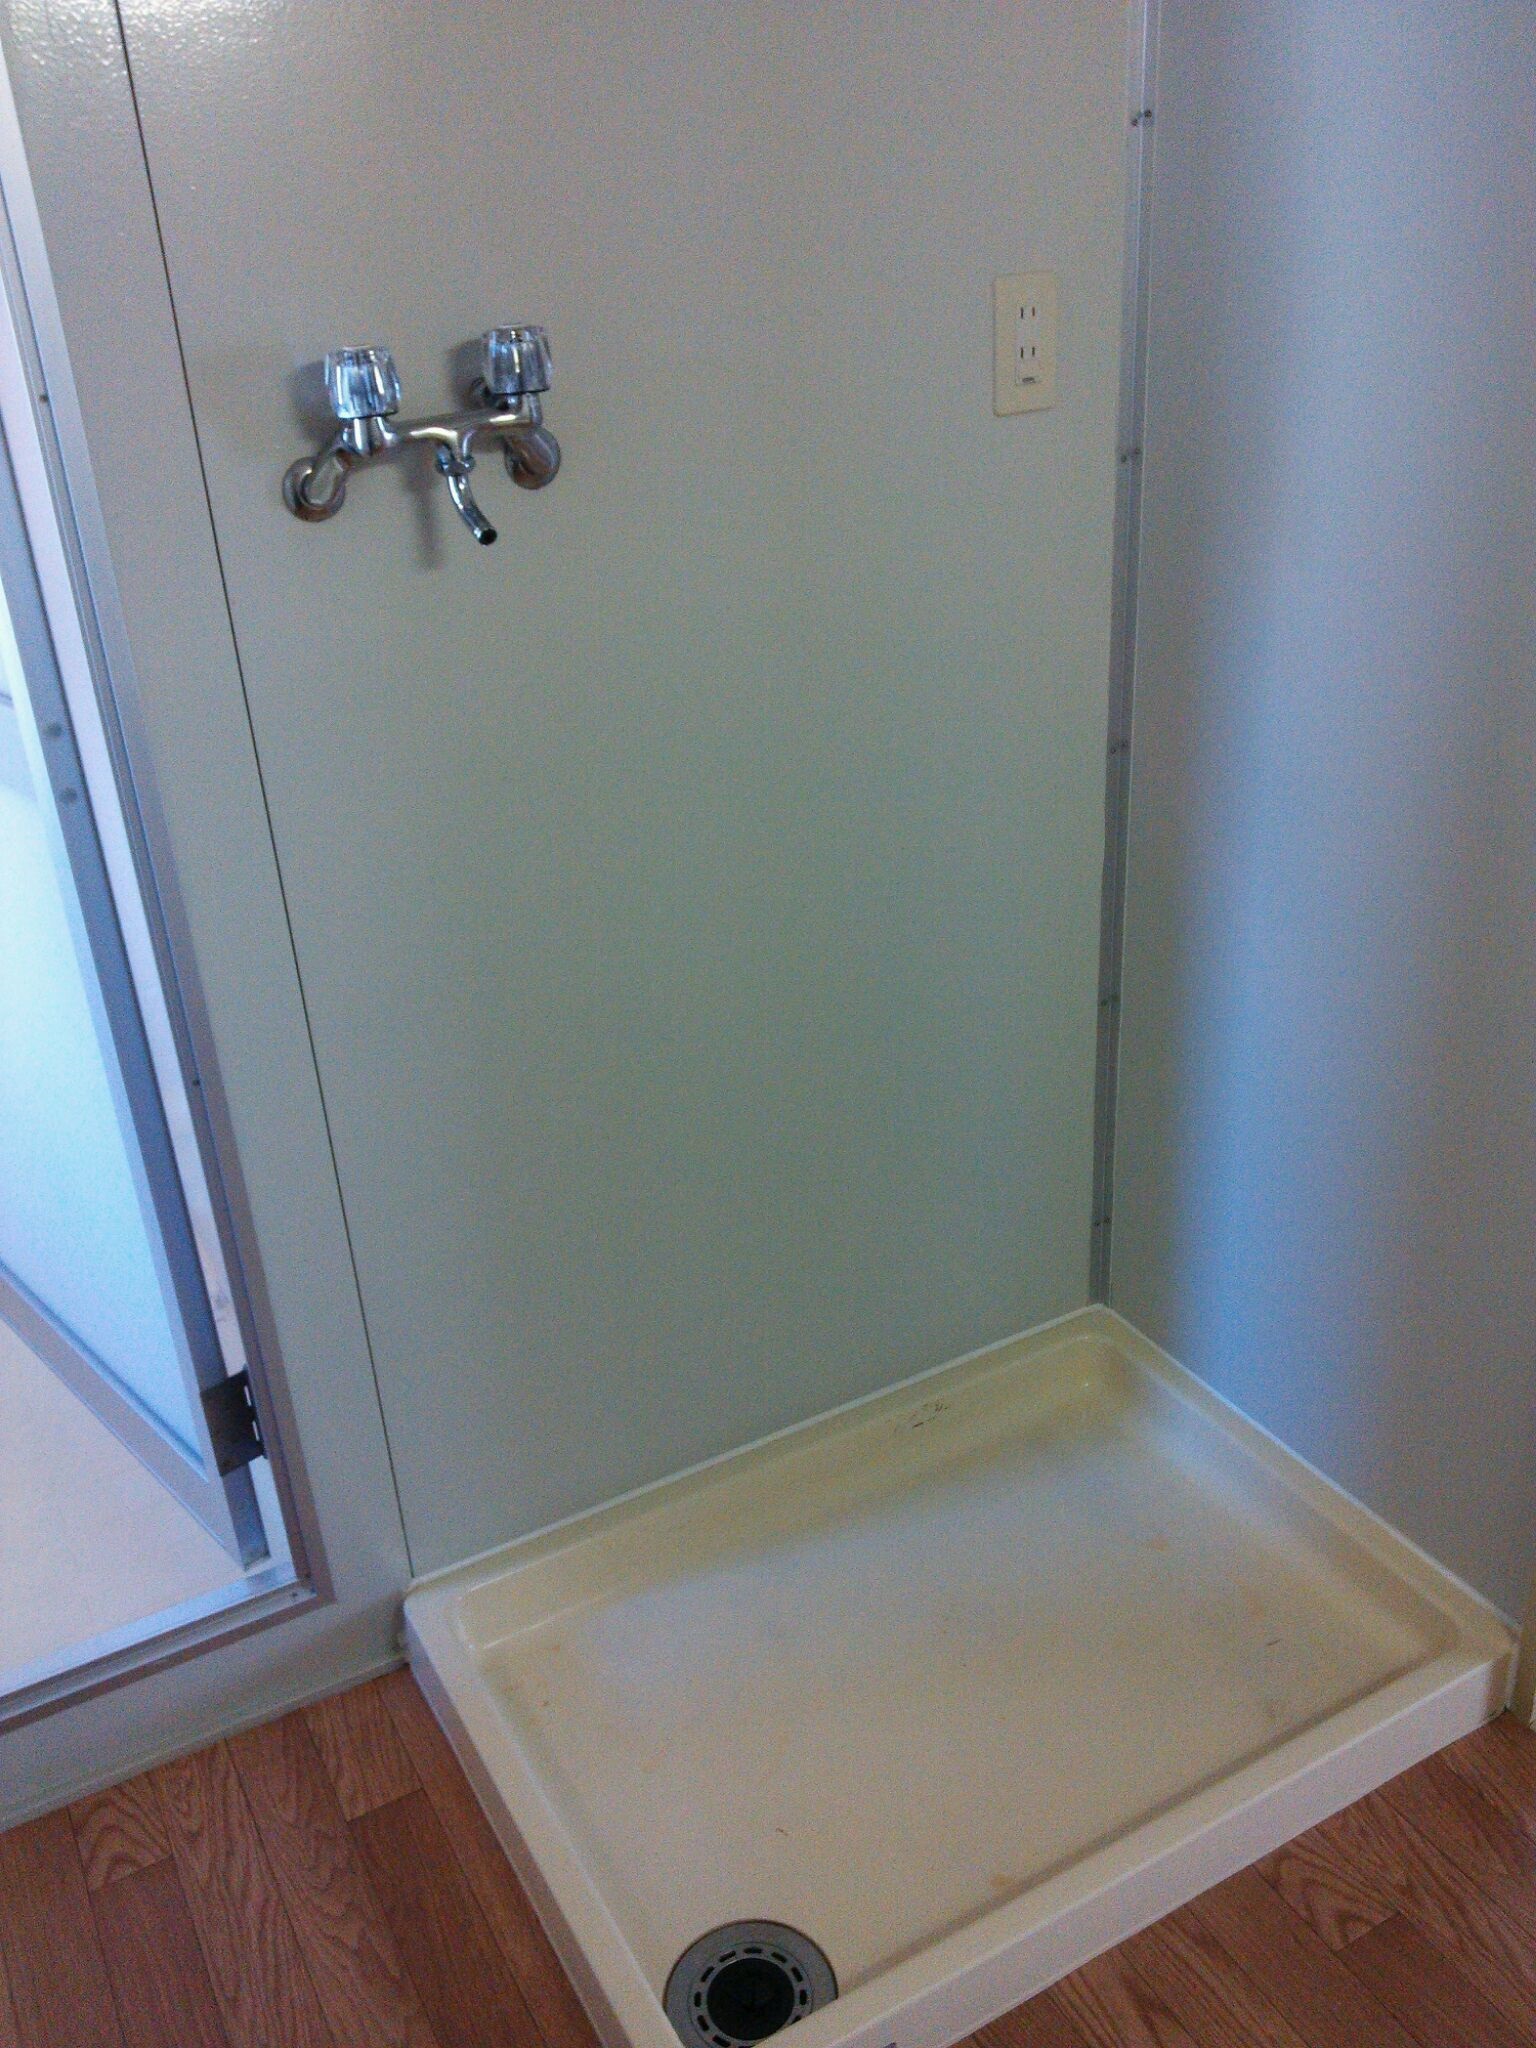 Washroom. Laundry Area, which was installed waterproof bread